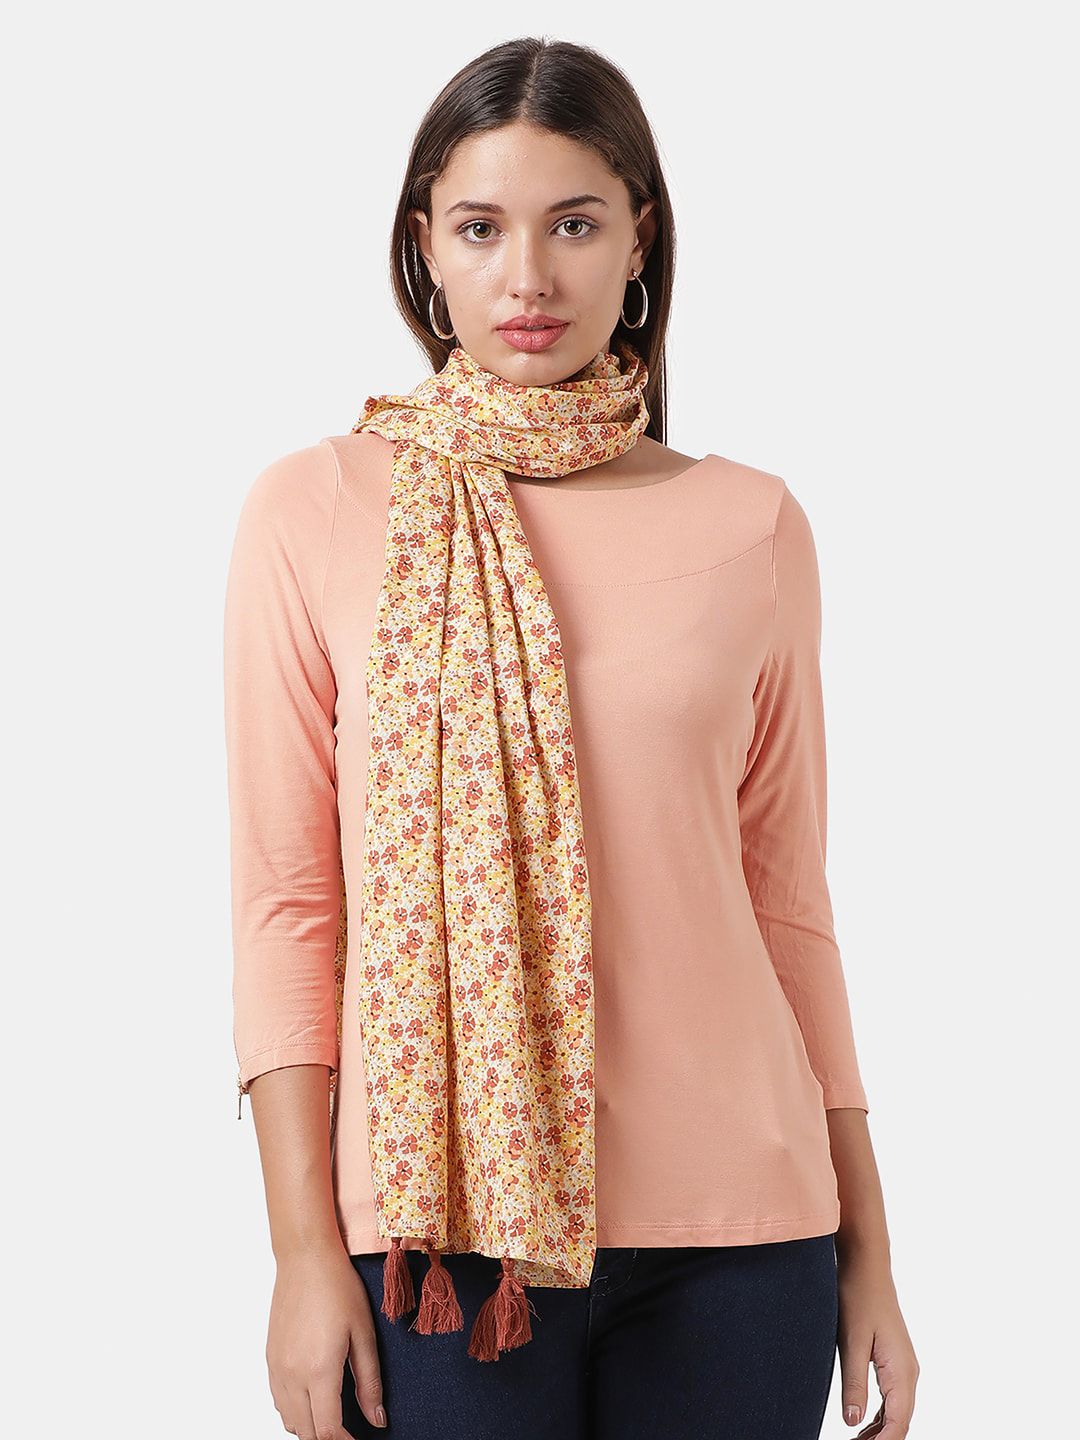 Llak Jeans Women Mustard & Peach-Coloured Printed Stole Price in India